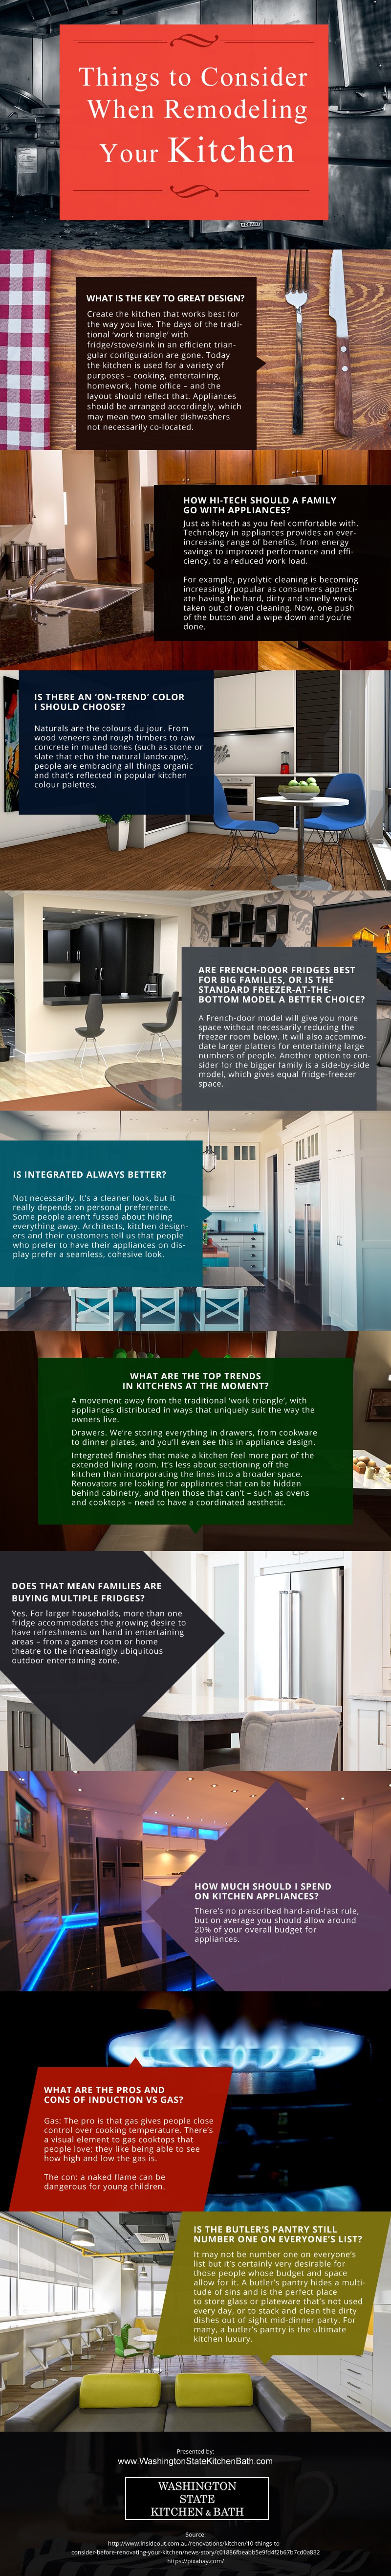 Things-to-Consider-When-Remodeling-Your-Kitchen Infographic